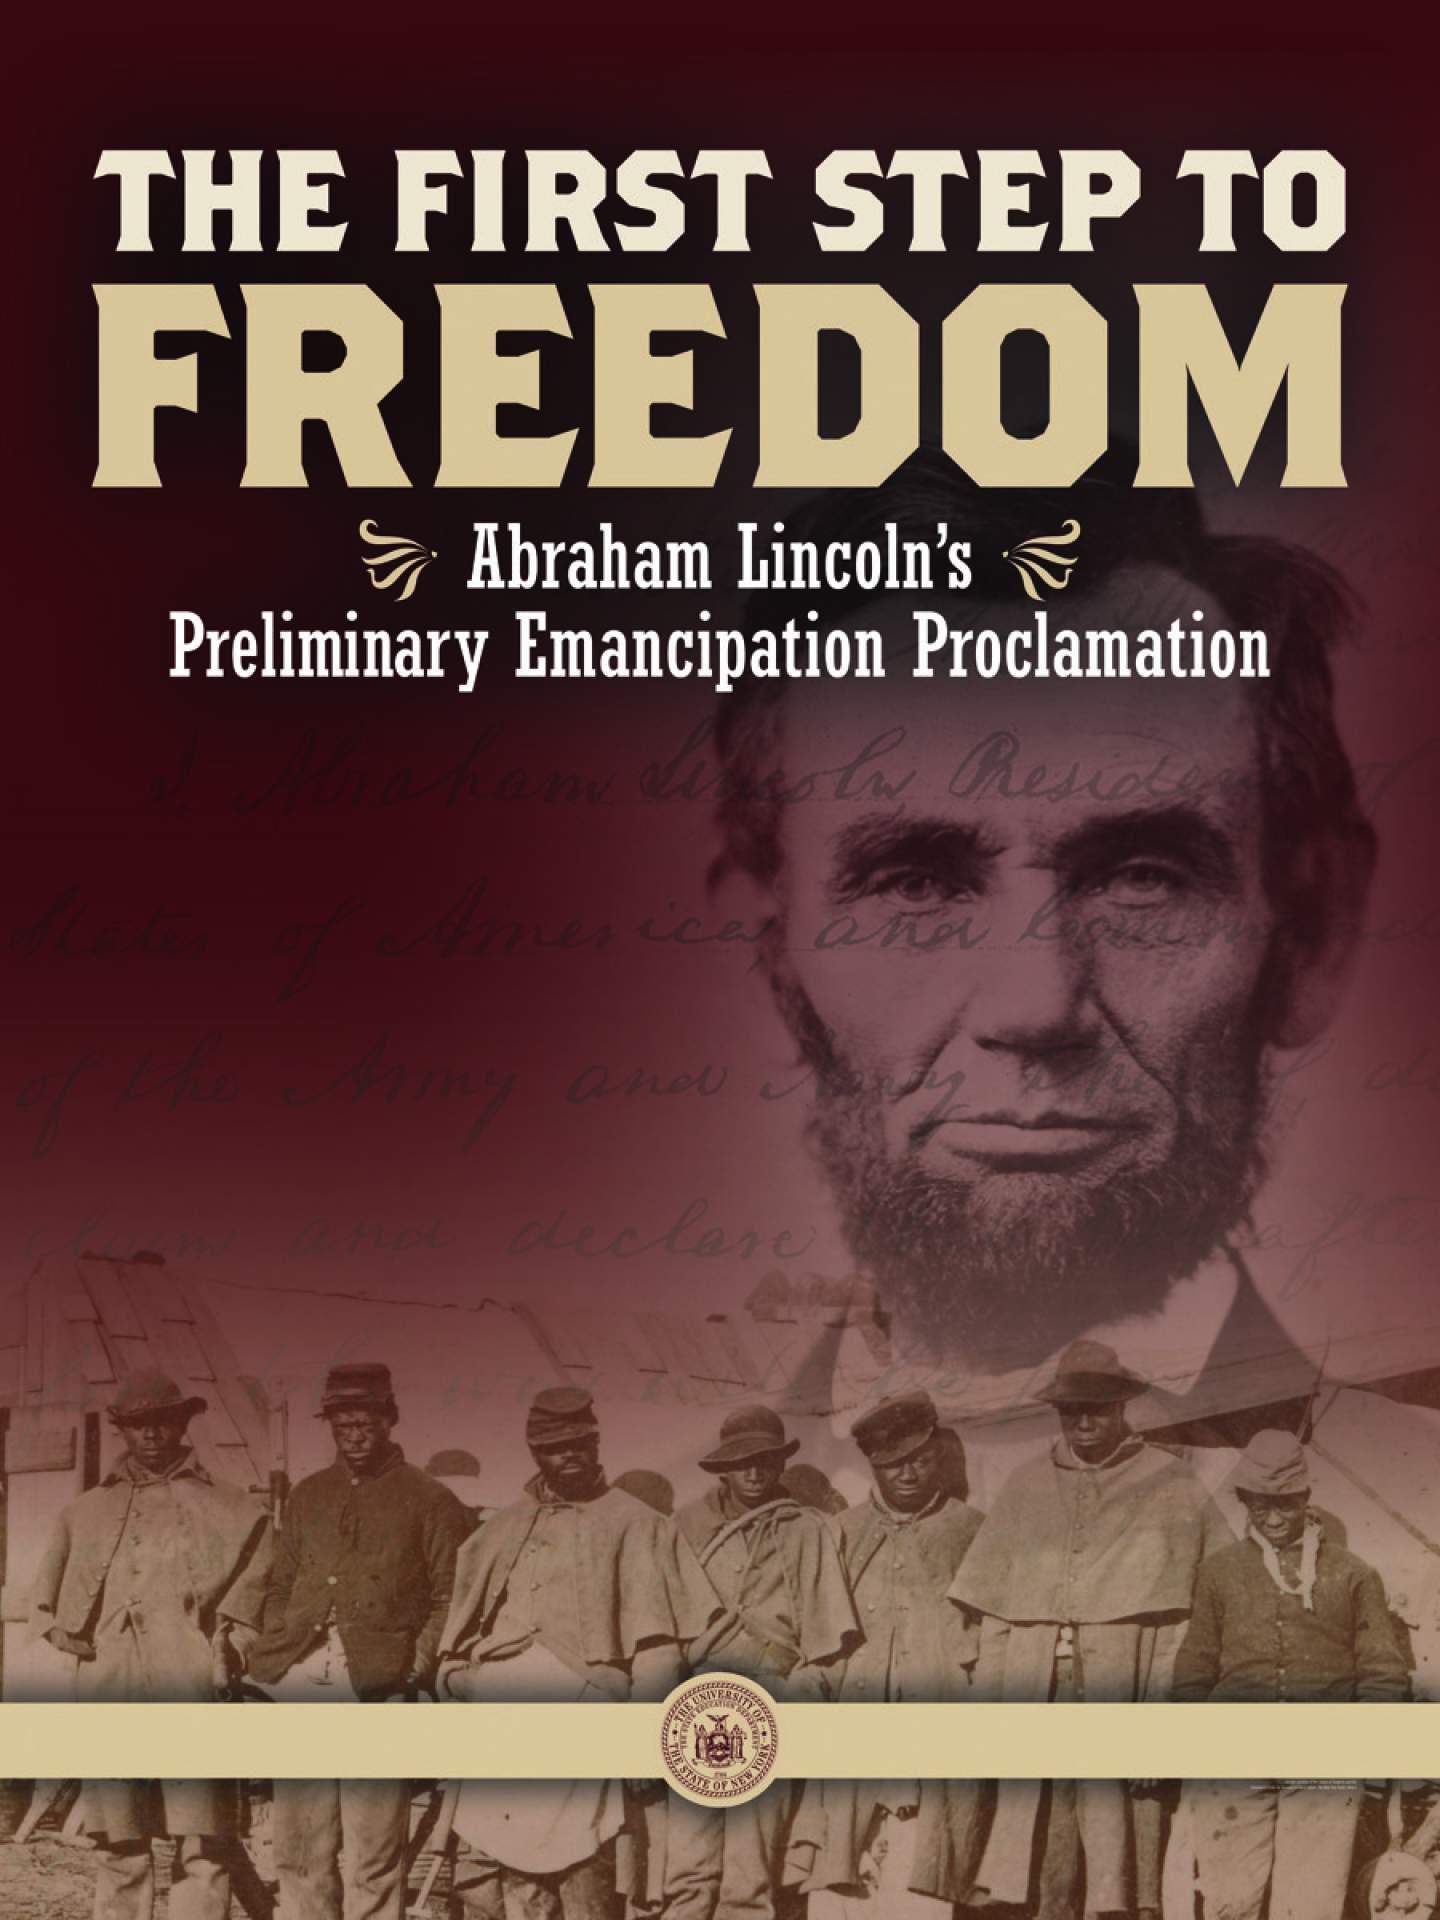 Welcoming Remarks for <em> The First Step to Freedoom: Abraham Lincoln's Preliminary Emancipation Proclamation